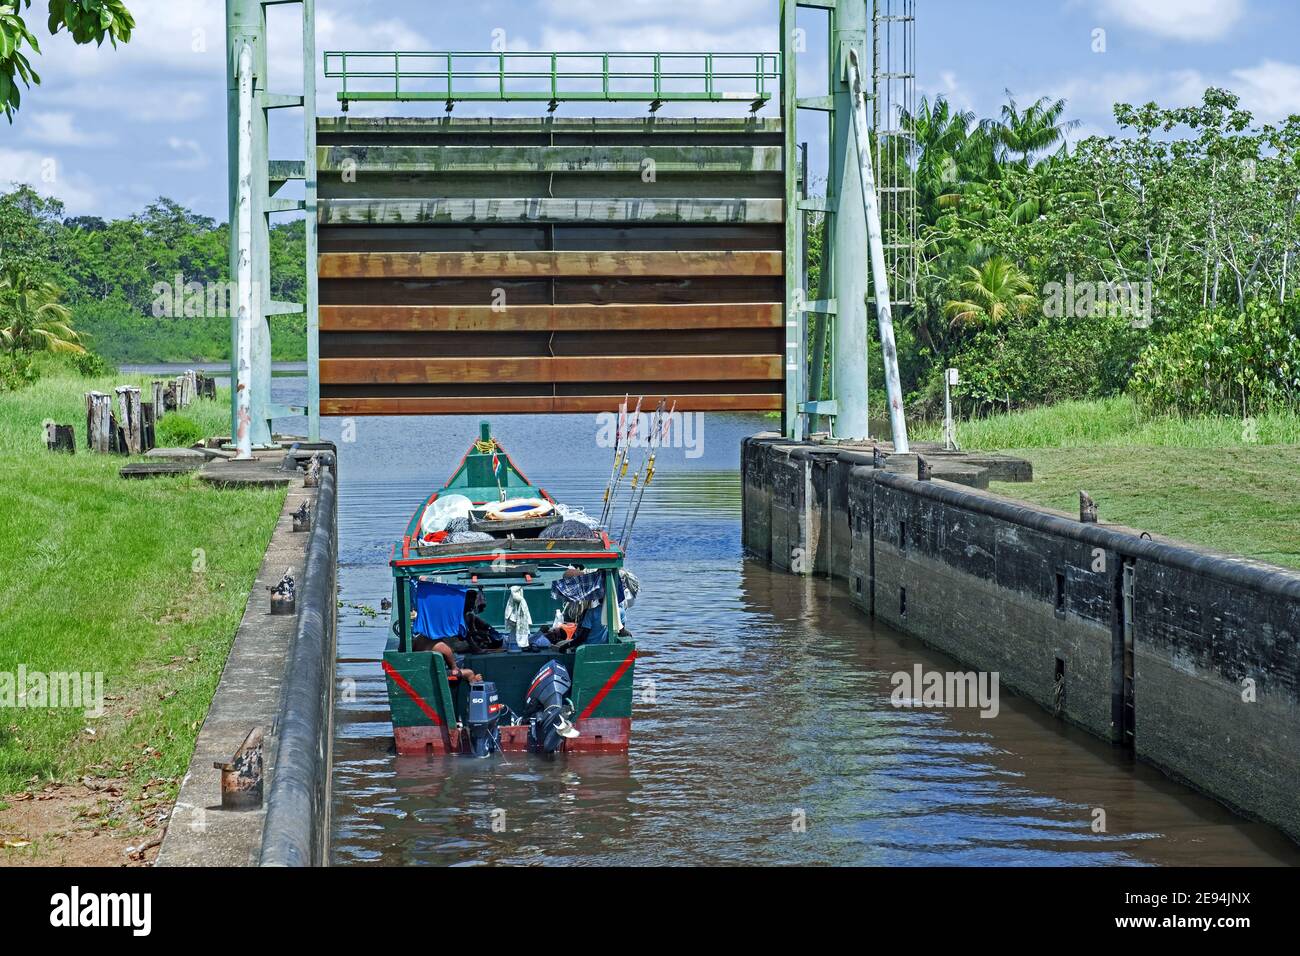 Small traditional wooden fishing boat leaving lock / sluice gate on the Saramacca River at the village Uitkijk, Saramacca District, Suriname / Surinam Stock Photo